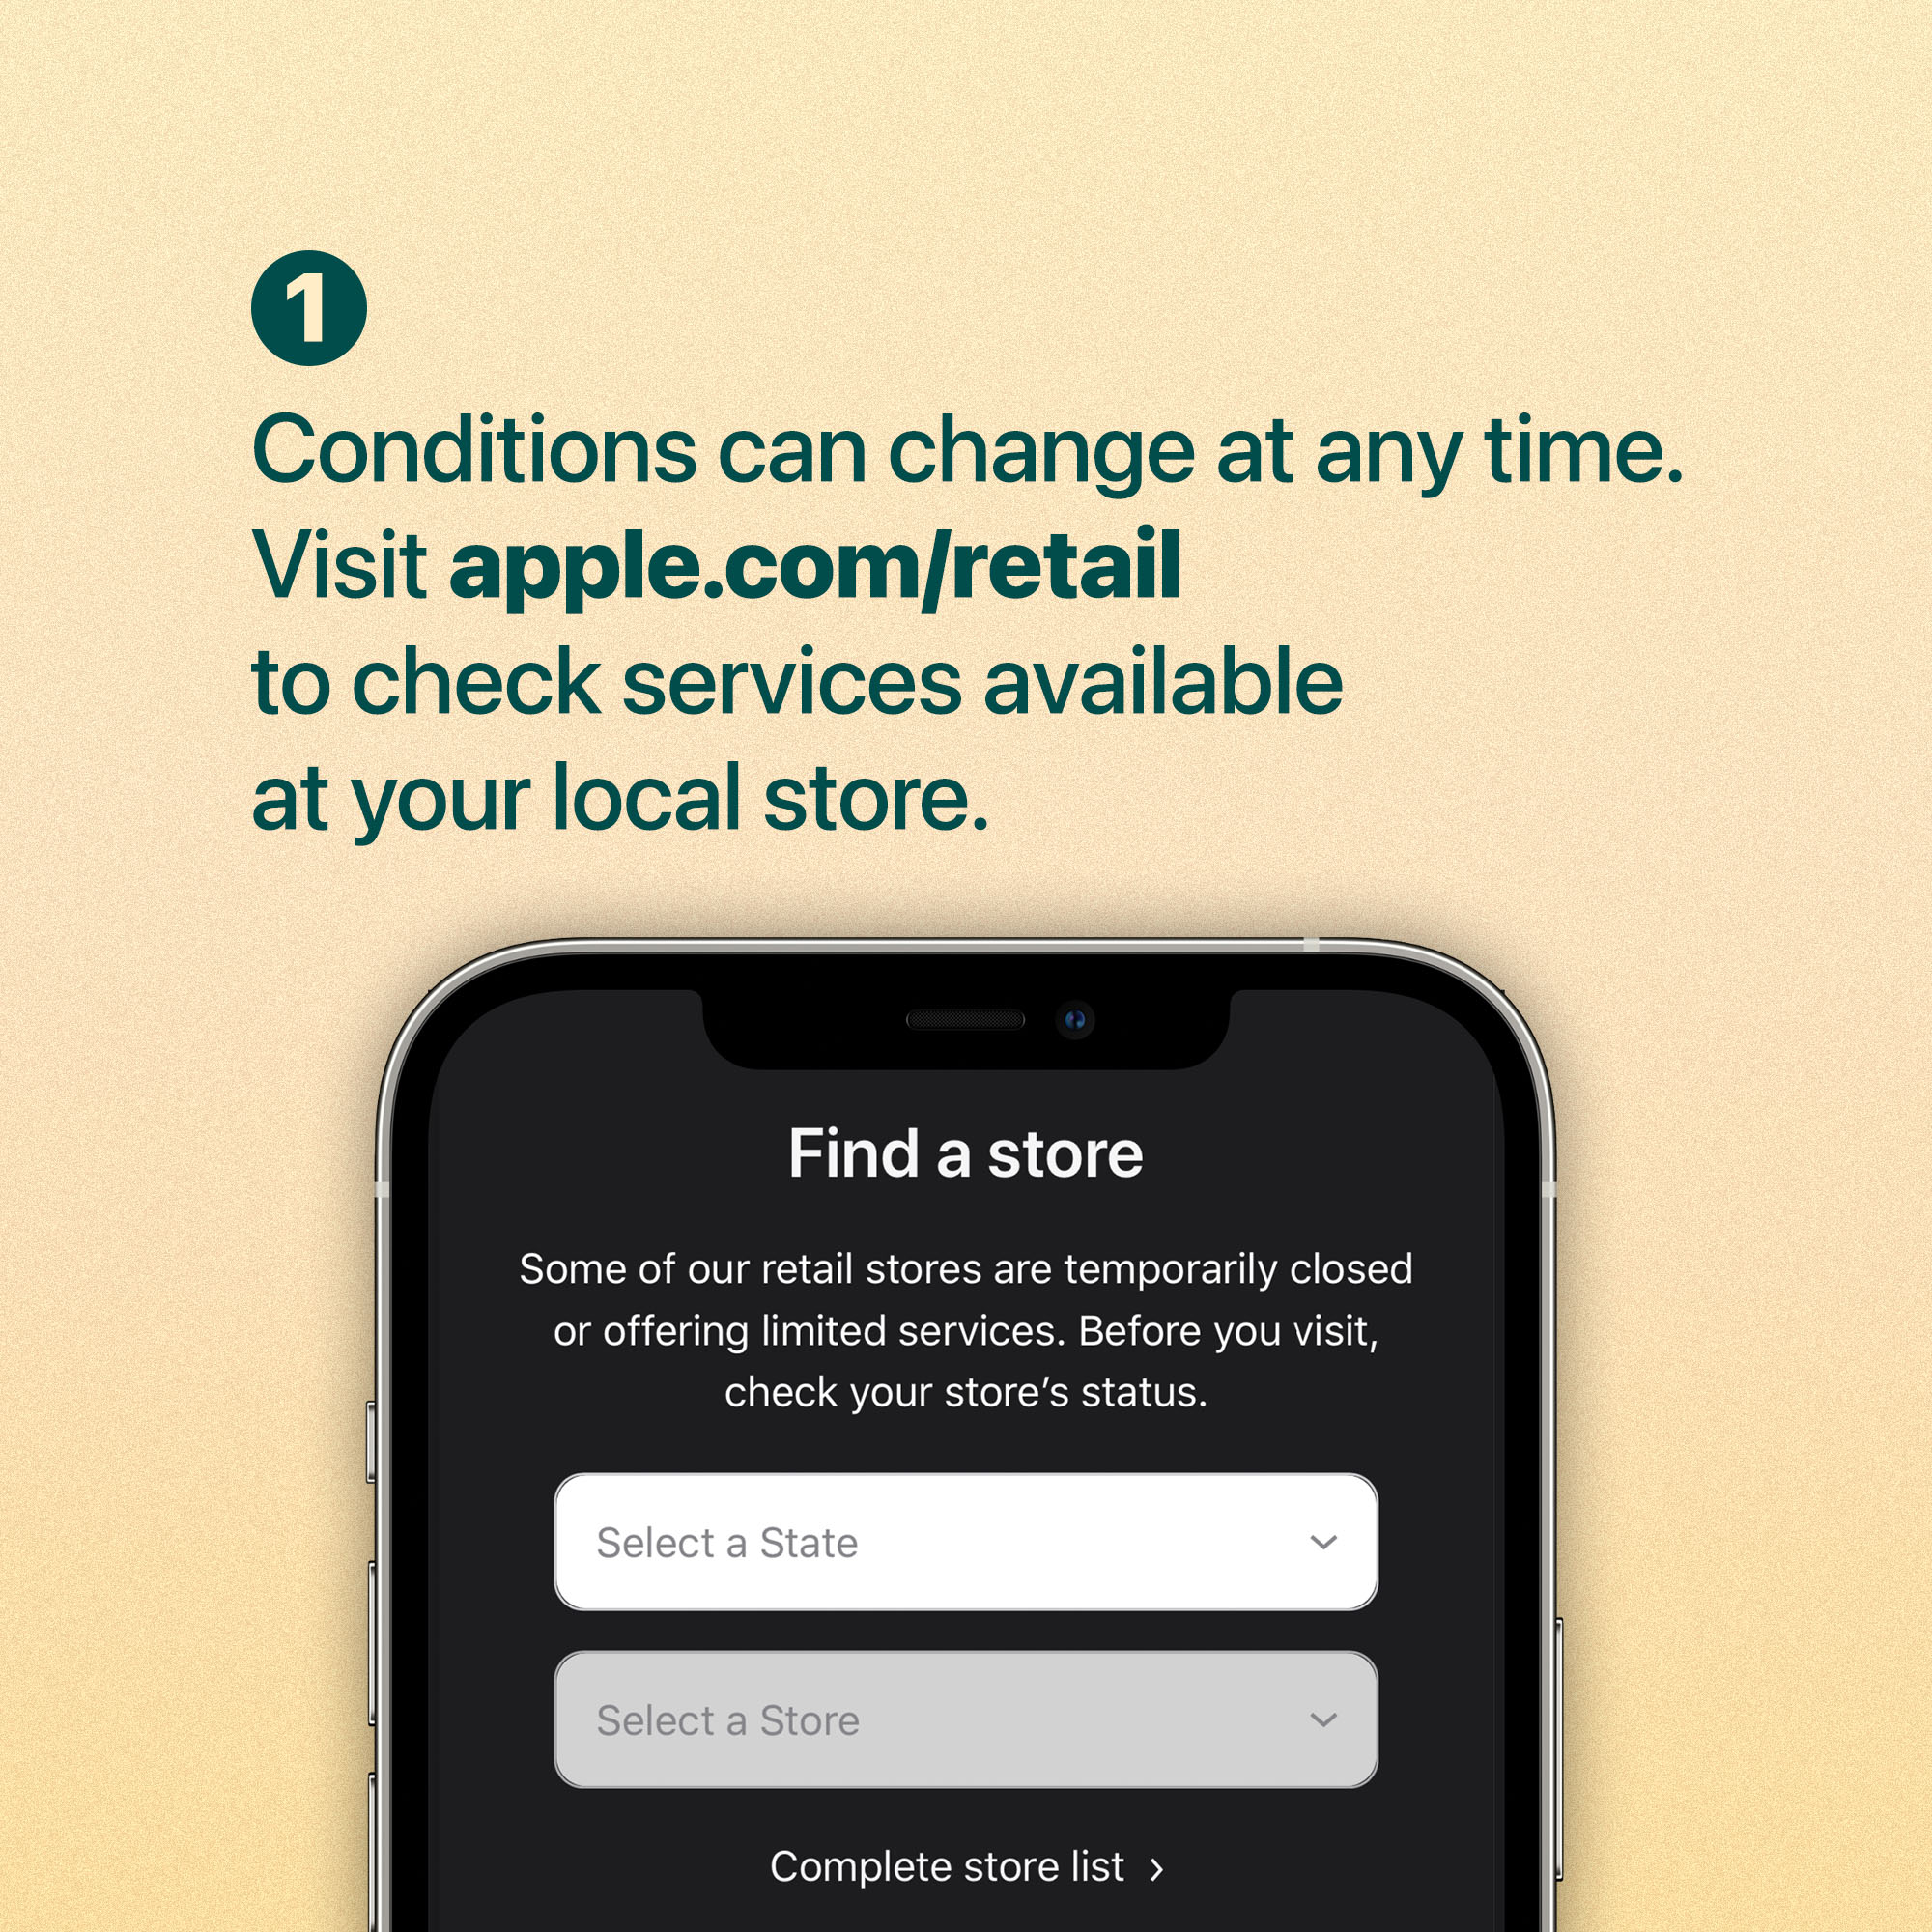 Conditions can change at any time. Visit apple.com/retail to check services available at your local store.